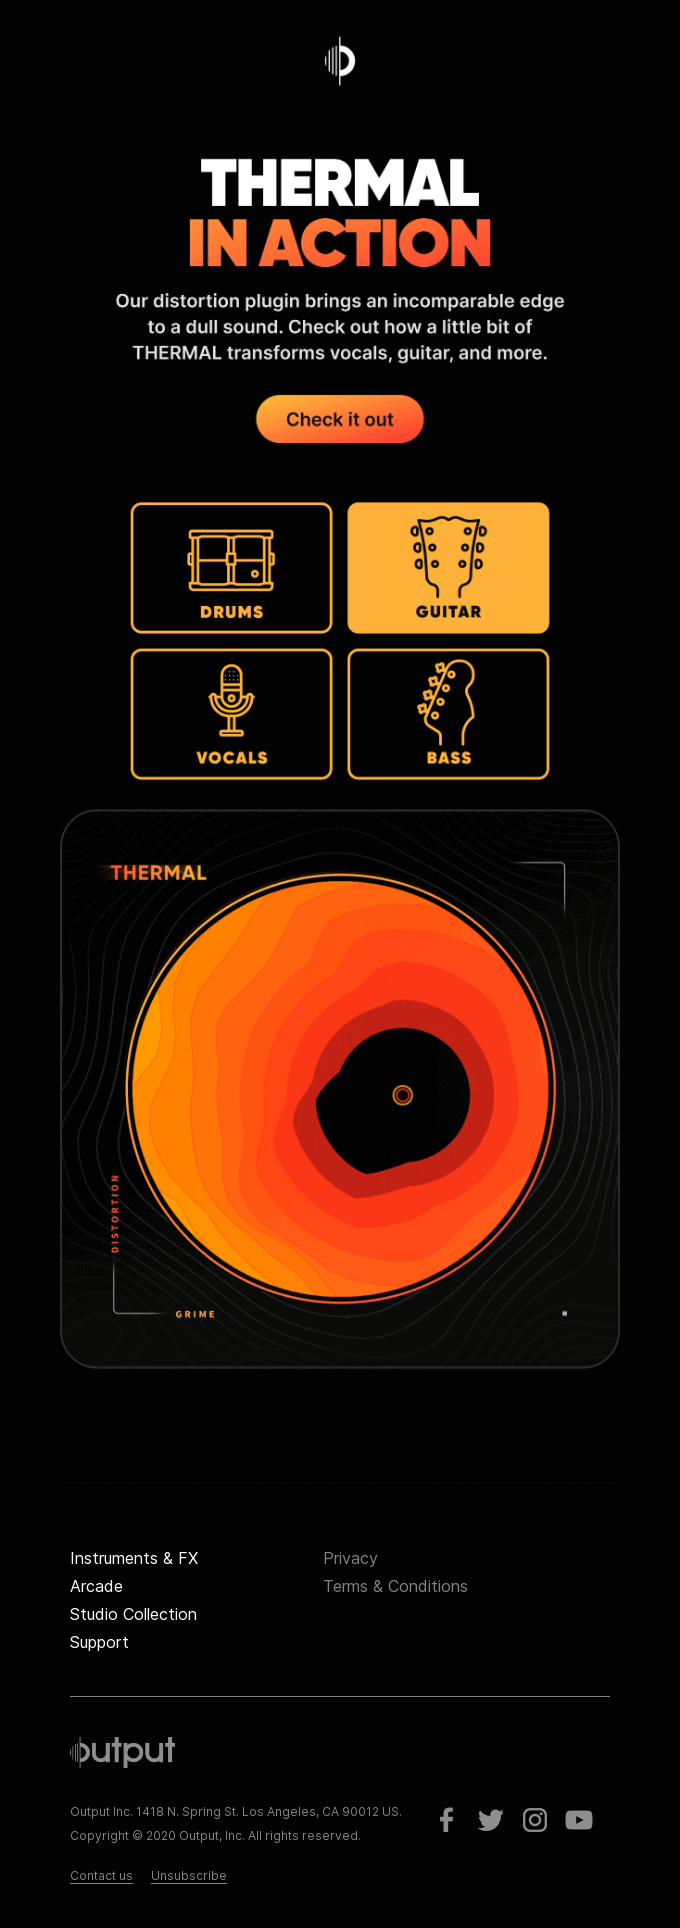 Output introduces their distortion plugin with concise yet impactful text, complemented by visual icons depicting its application for drums, guitar, bass, and vocals. The visuals include a diagram showcasing the spectrum of its effects.